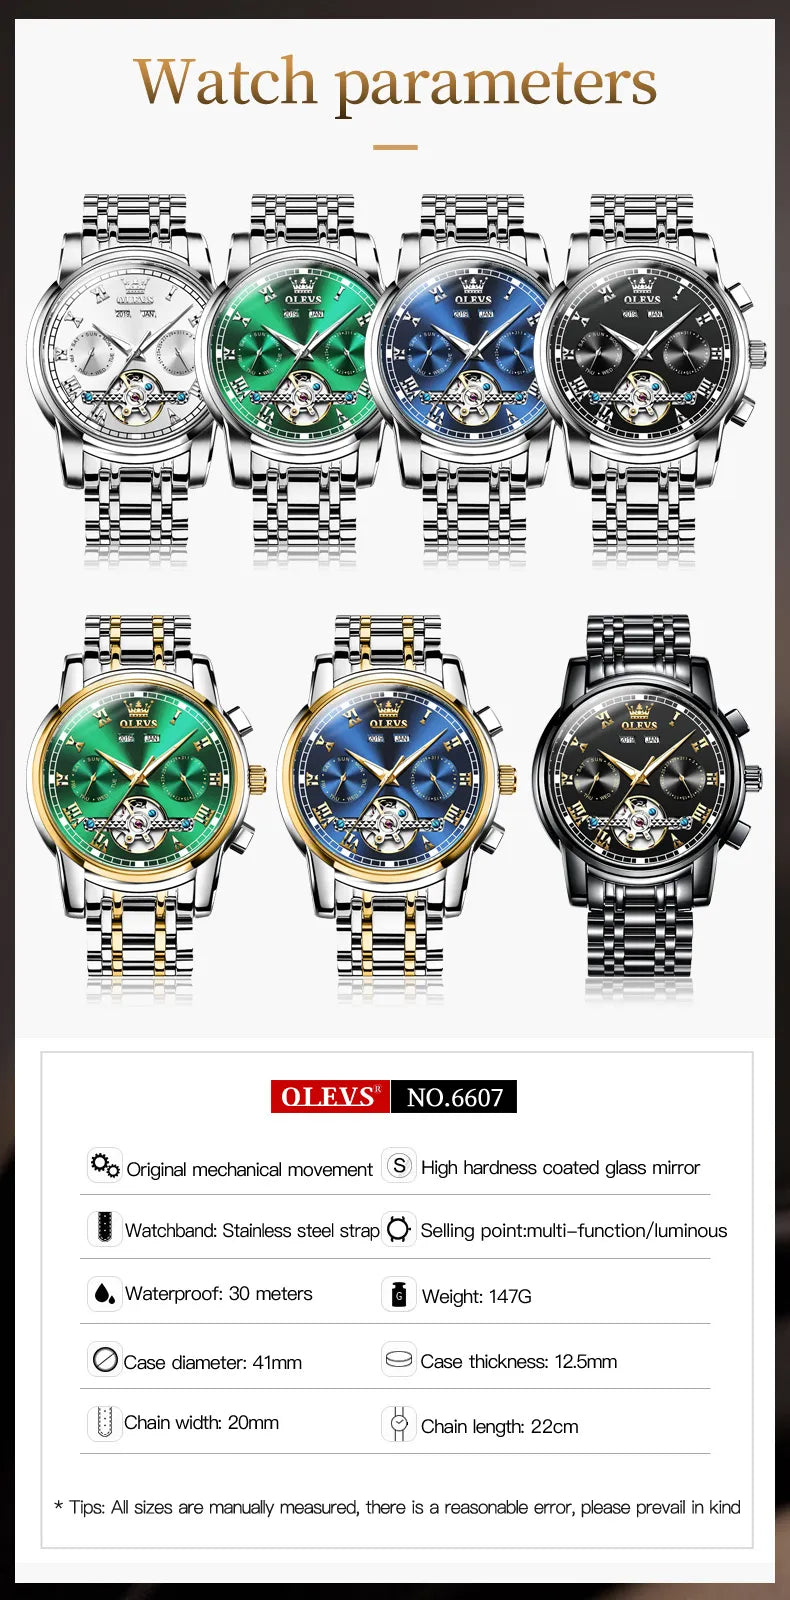 What Is Watch Frequency: And How Fast Does a Watch Need to Be? | GQ